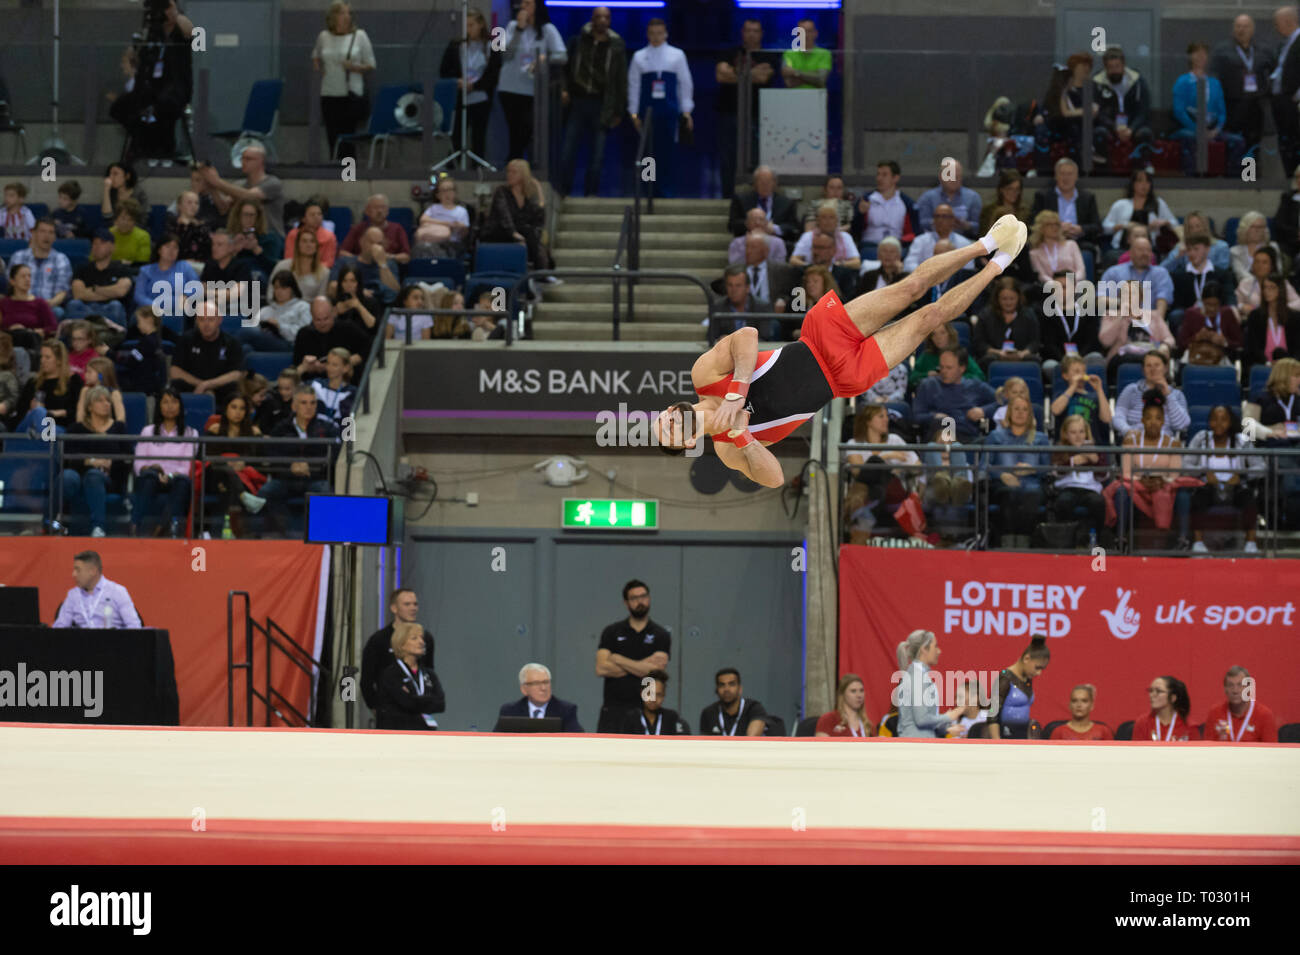 Liverpool, UK. 16th March 2019. British Champion James Hall of Pegasus Gym Club competing at the Men’s and Women’s Artistic British Championships 2019, M&S Bank Arena, Liverpool, UK. Stock Photo